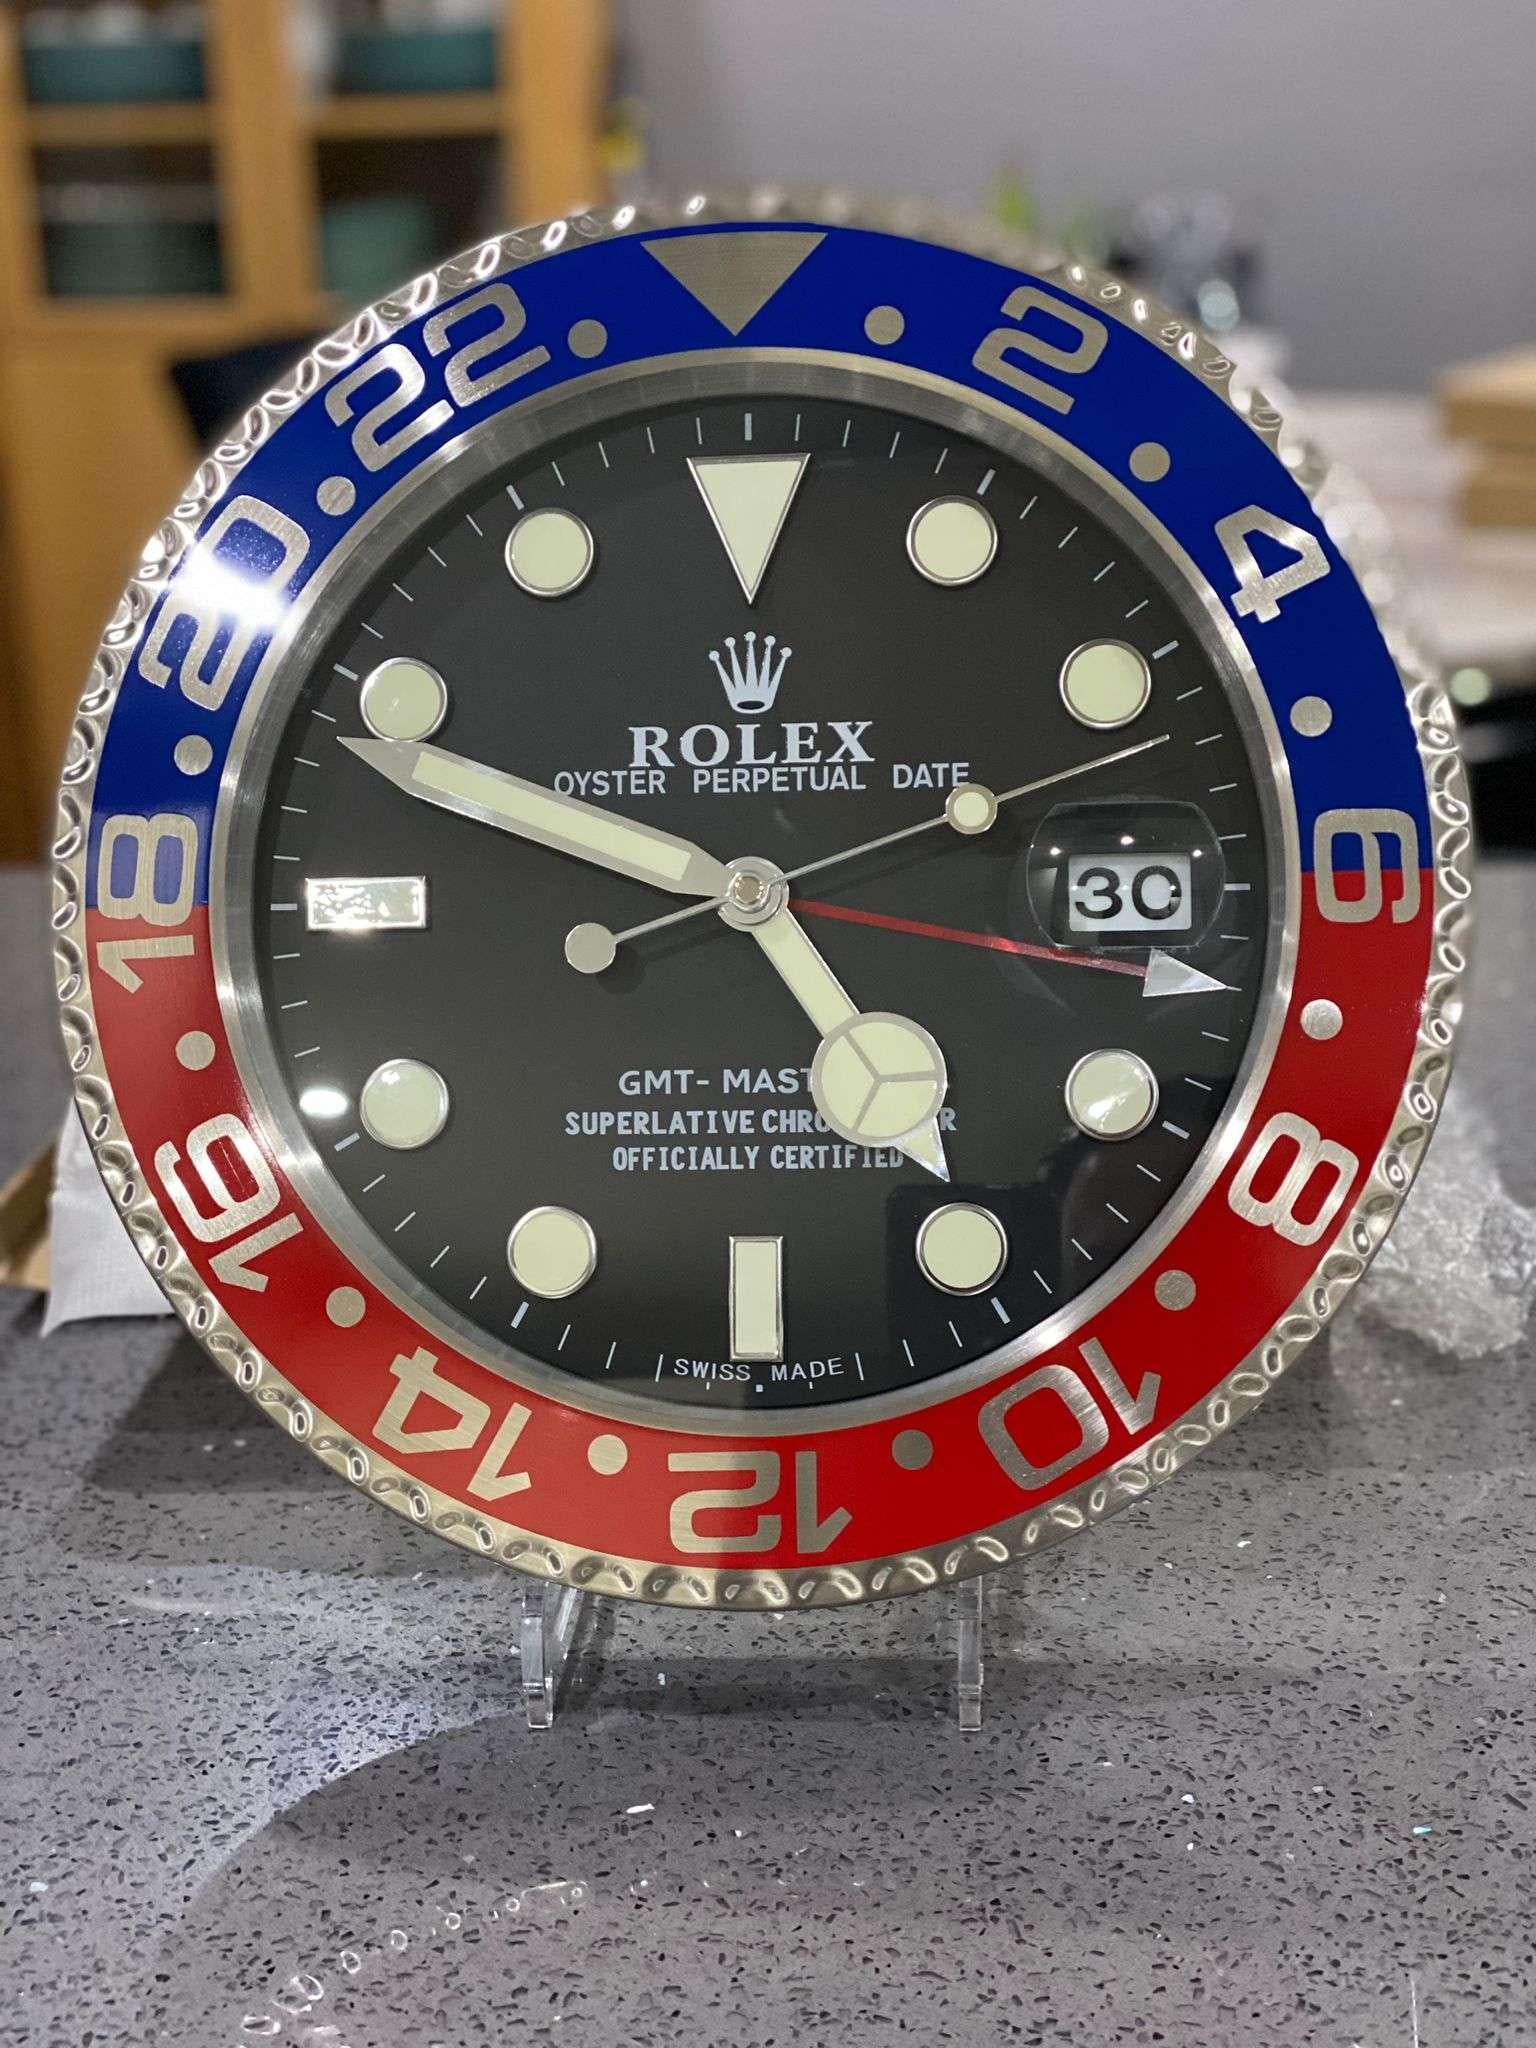 ROLEX Officially Licensed Oyster Perpetual Pepsi GMT Master II Wall Clock 
Good condition, working.
Free international shipping.